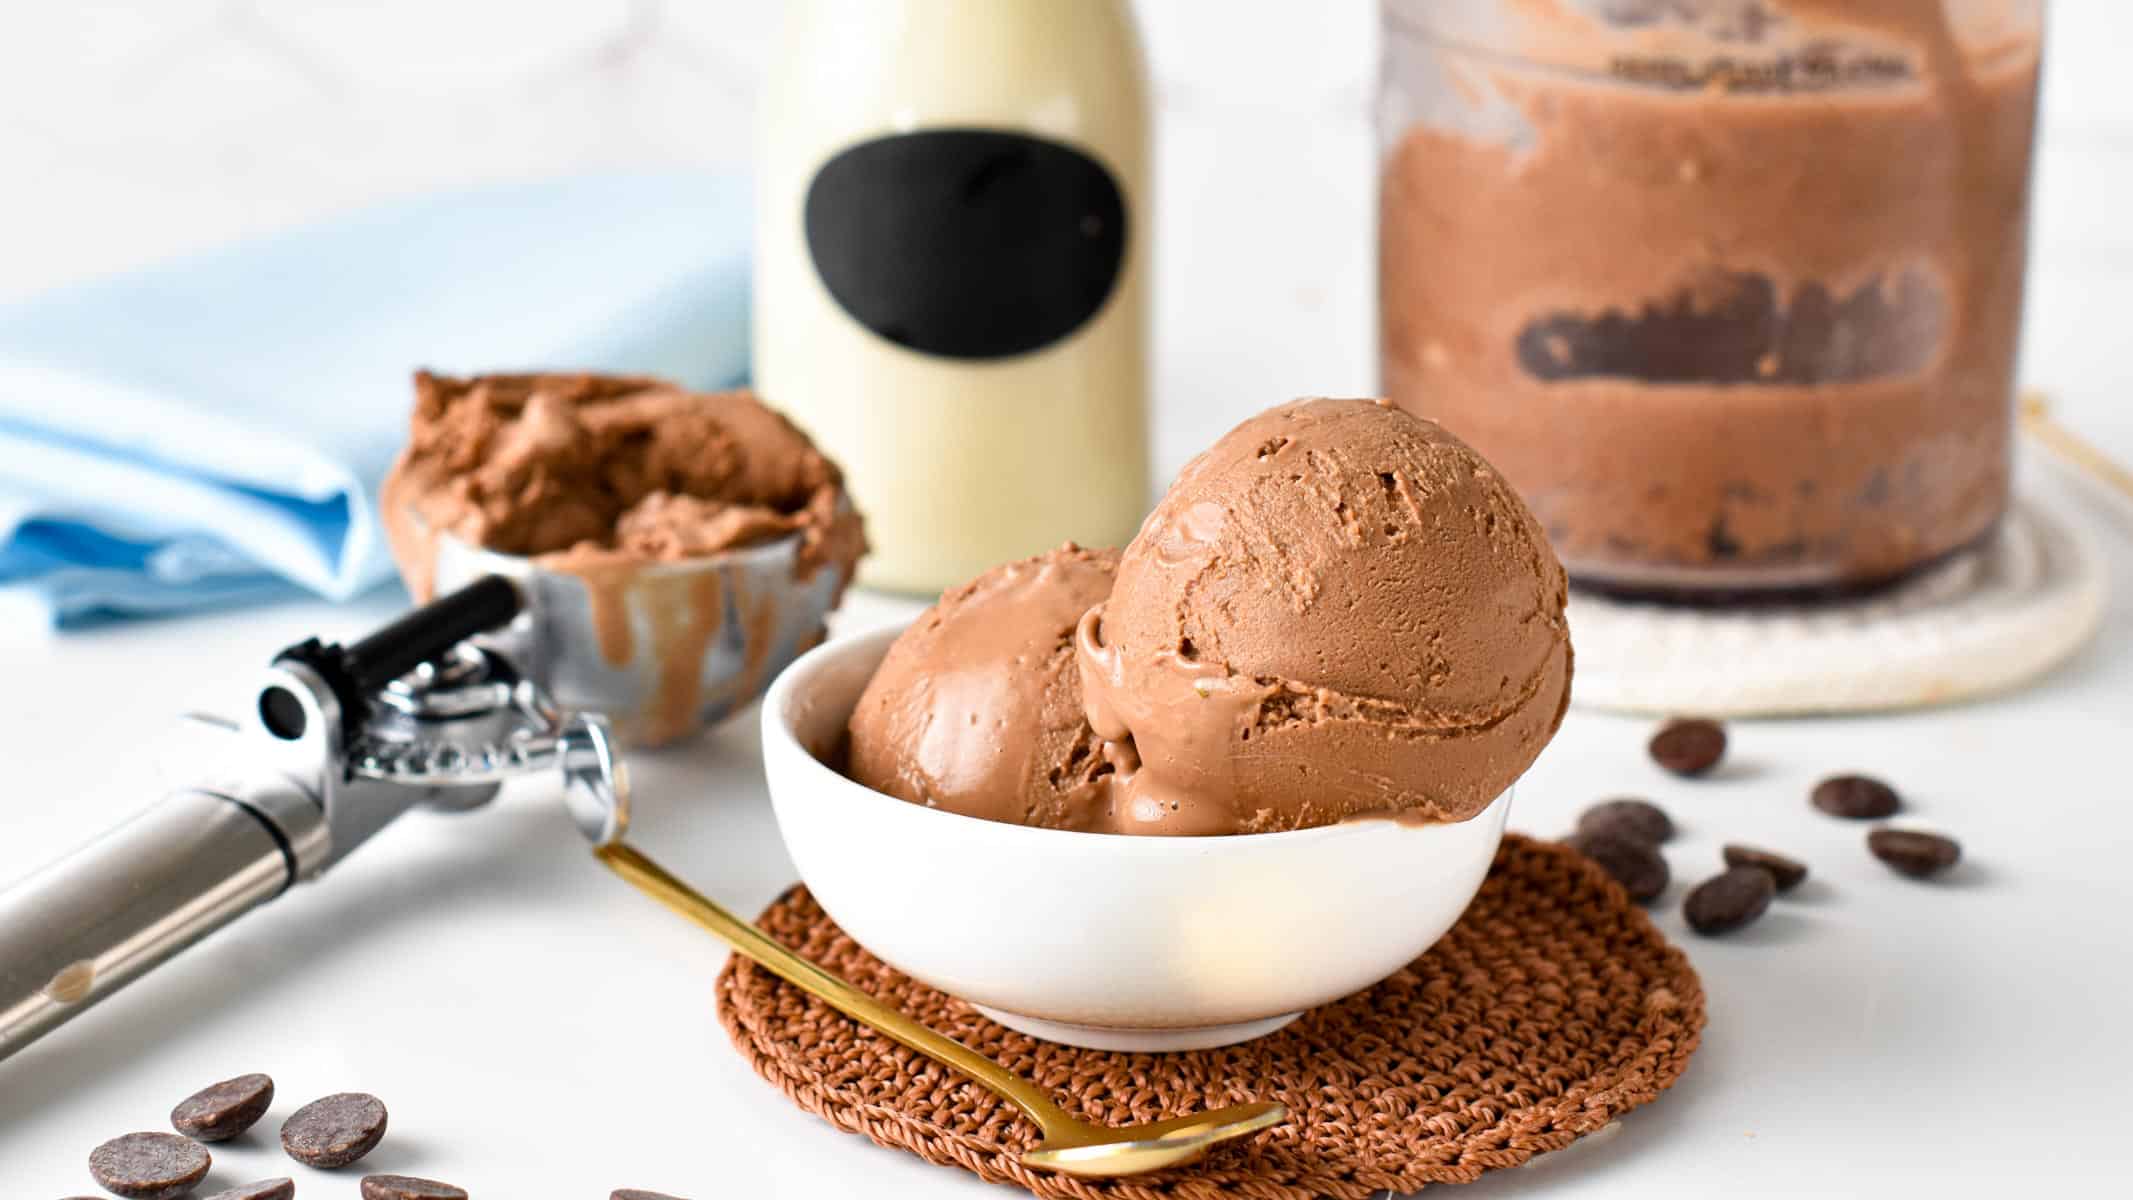 This Ninja Creami Protein Ice Cream is the easiest protein ice cream you can make this summer using the Ninja Creami ice cream maker and contains 15 grams of protein per serving.